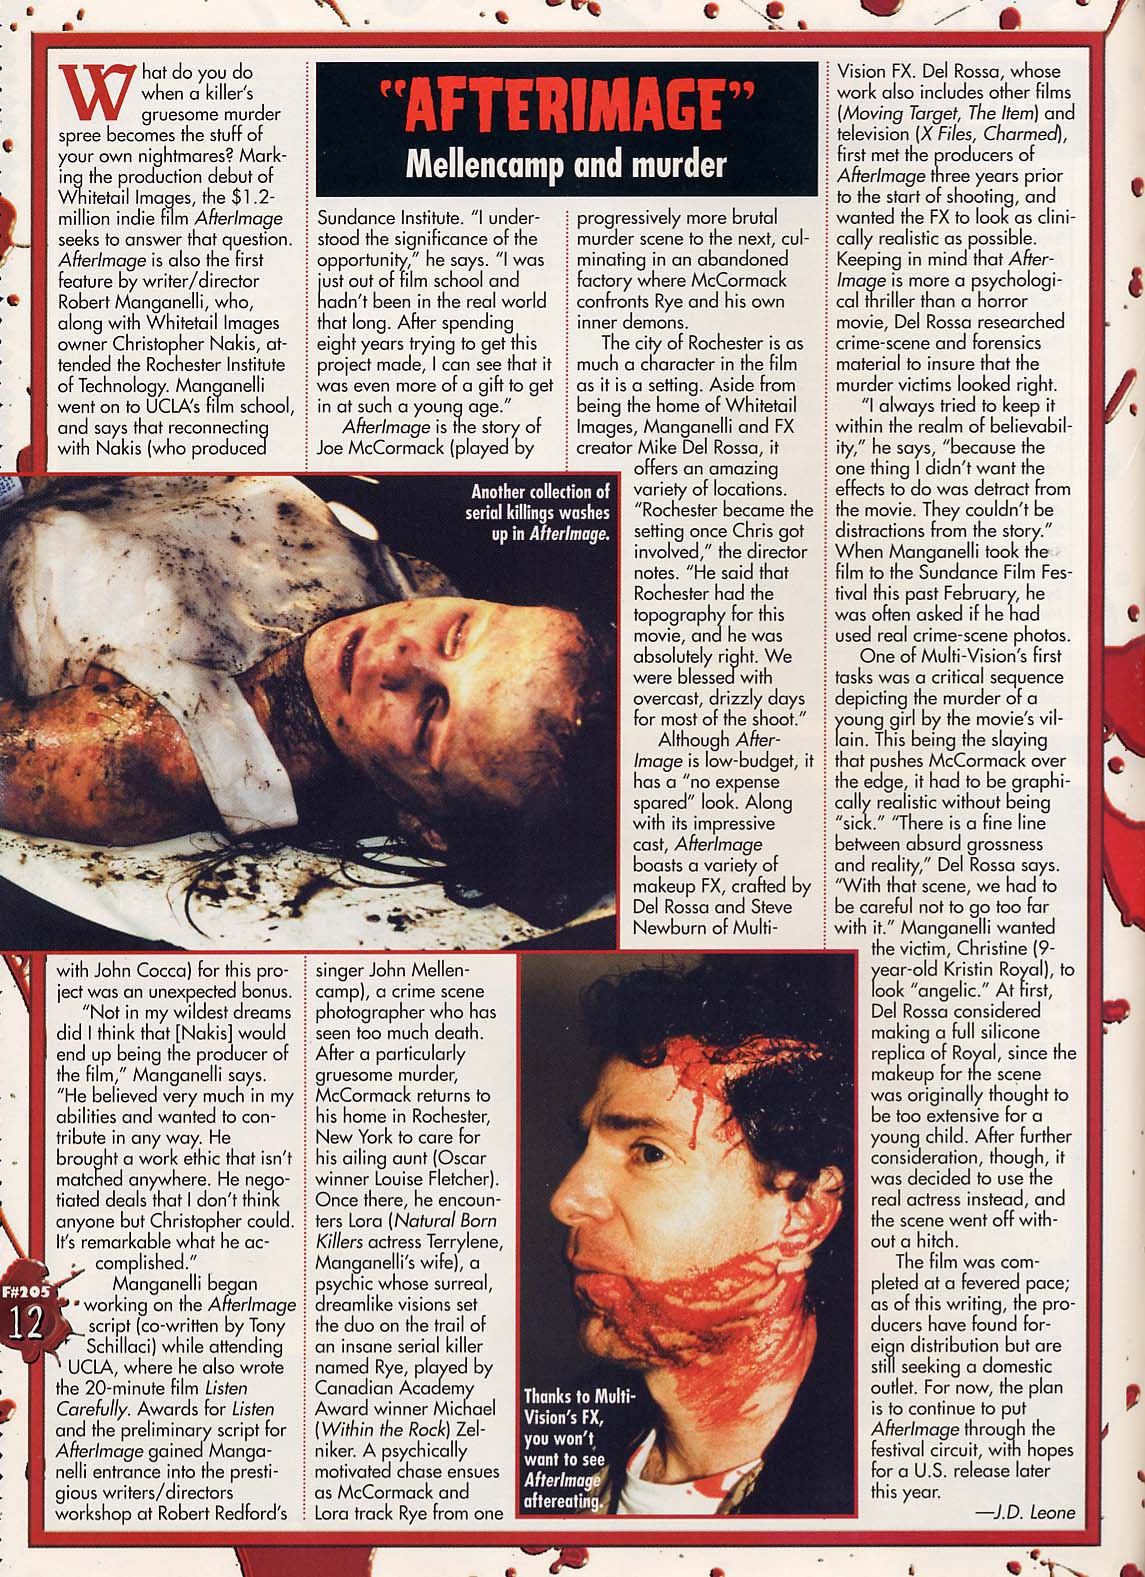 An Fangoria article about the effects Multivision fx provided for 